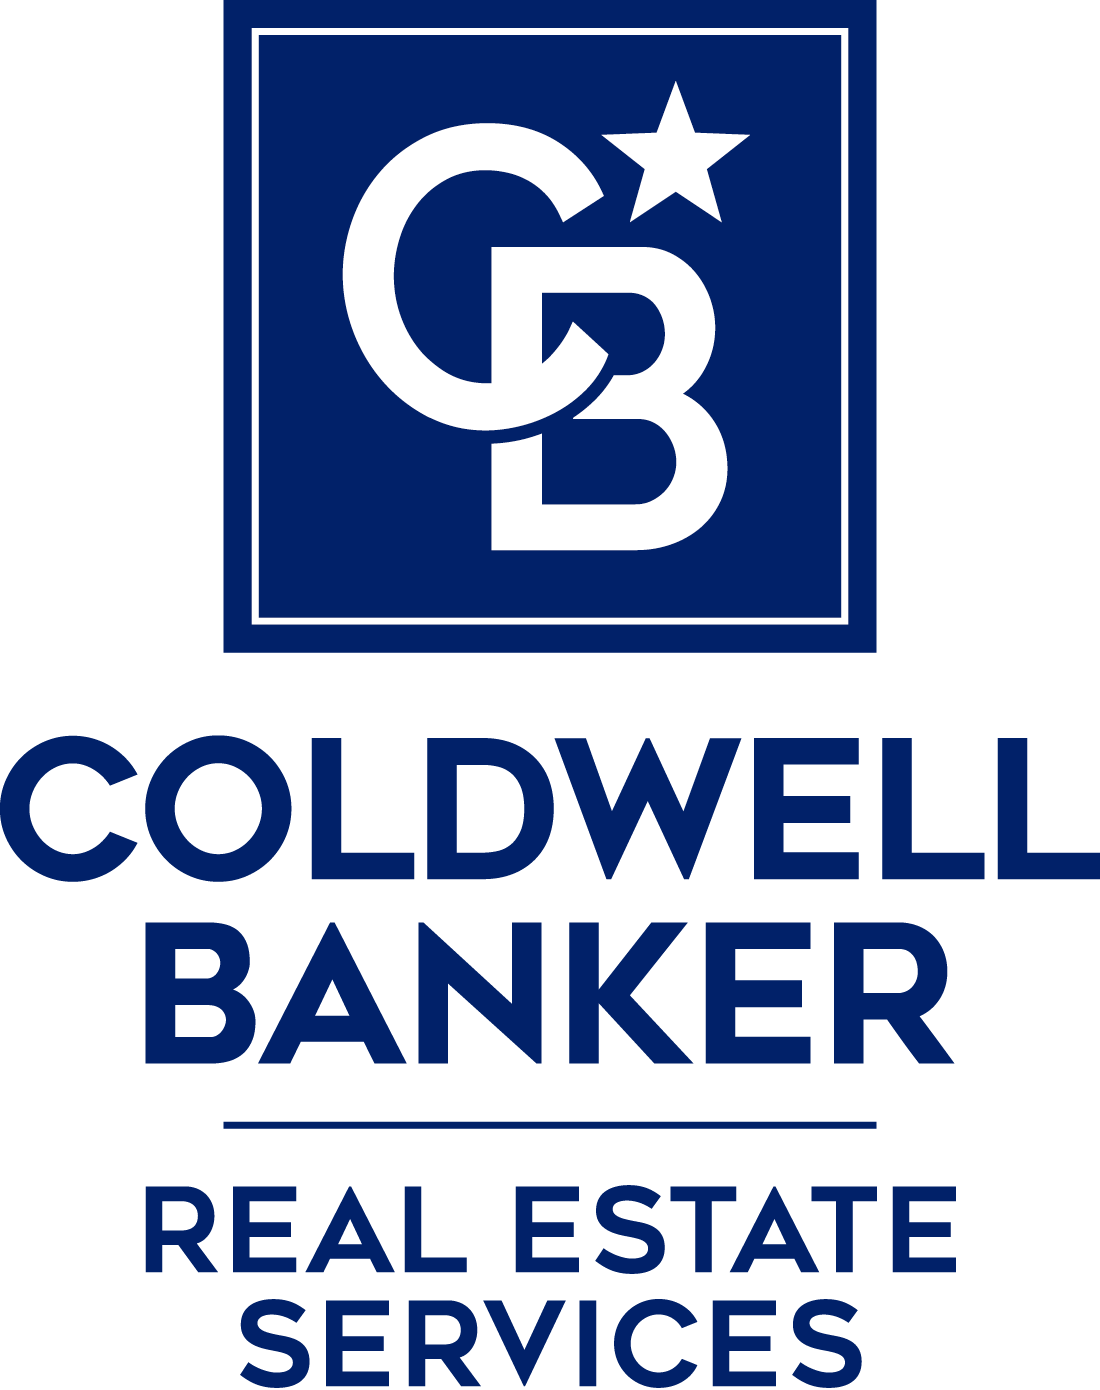 Coldwell Banker Real Estate Services